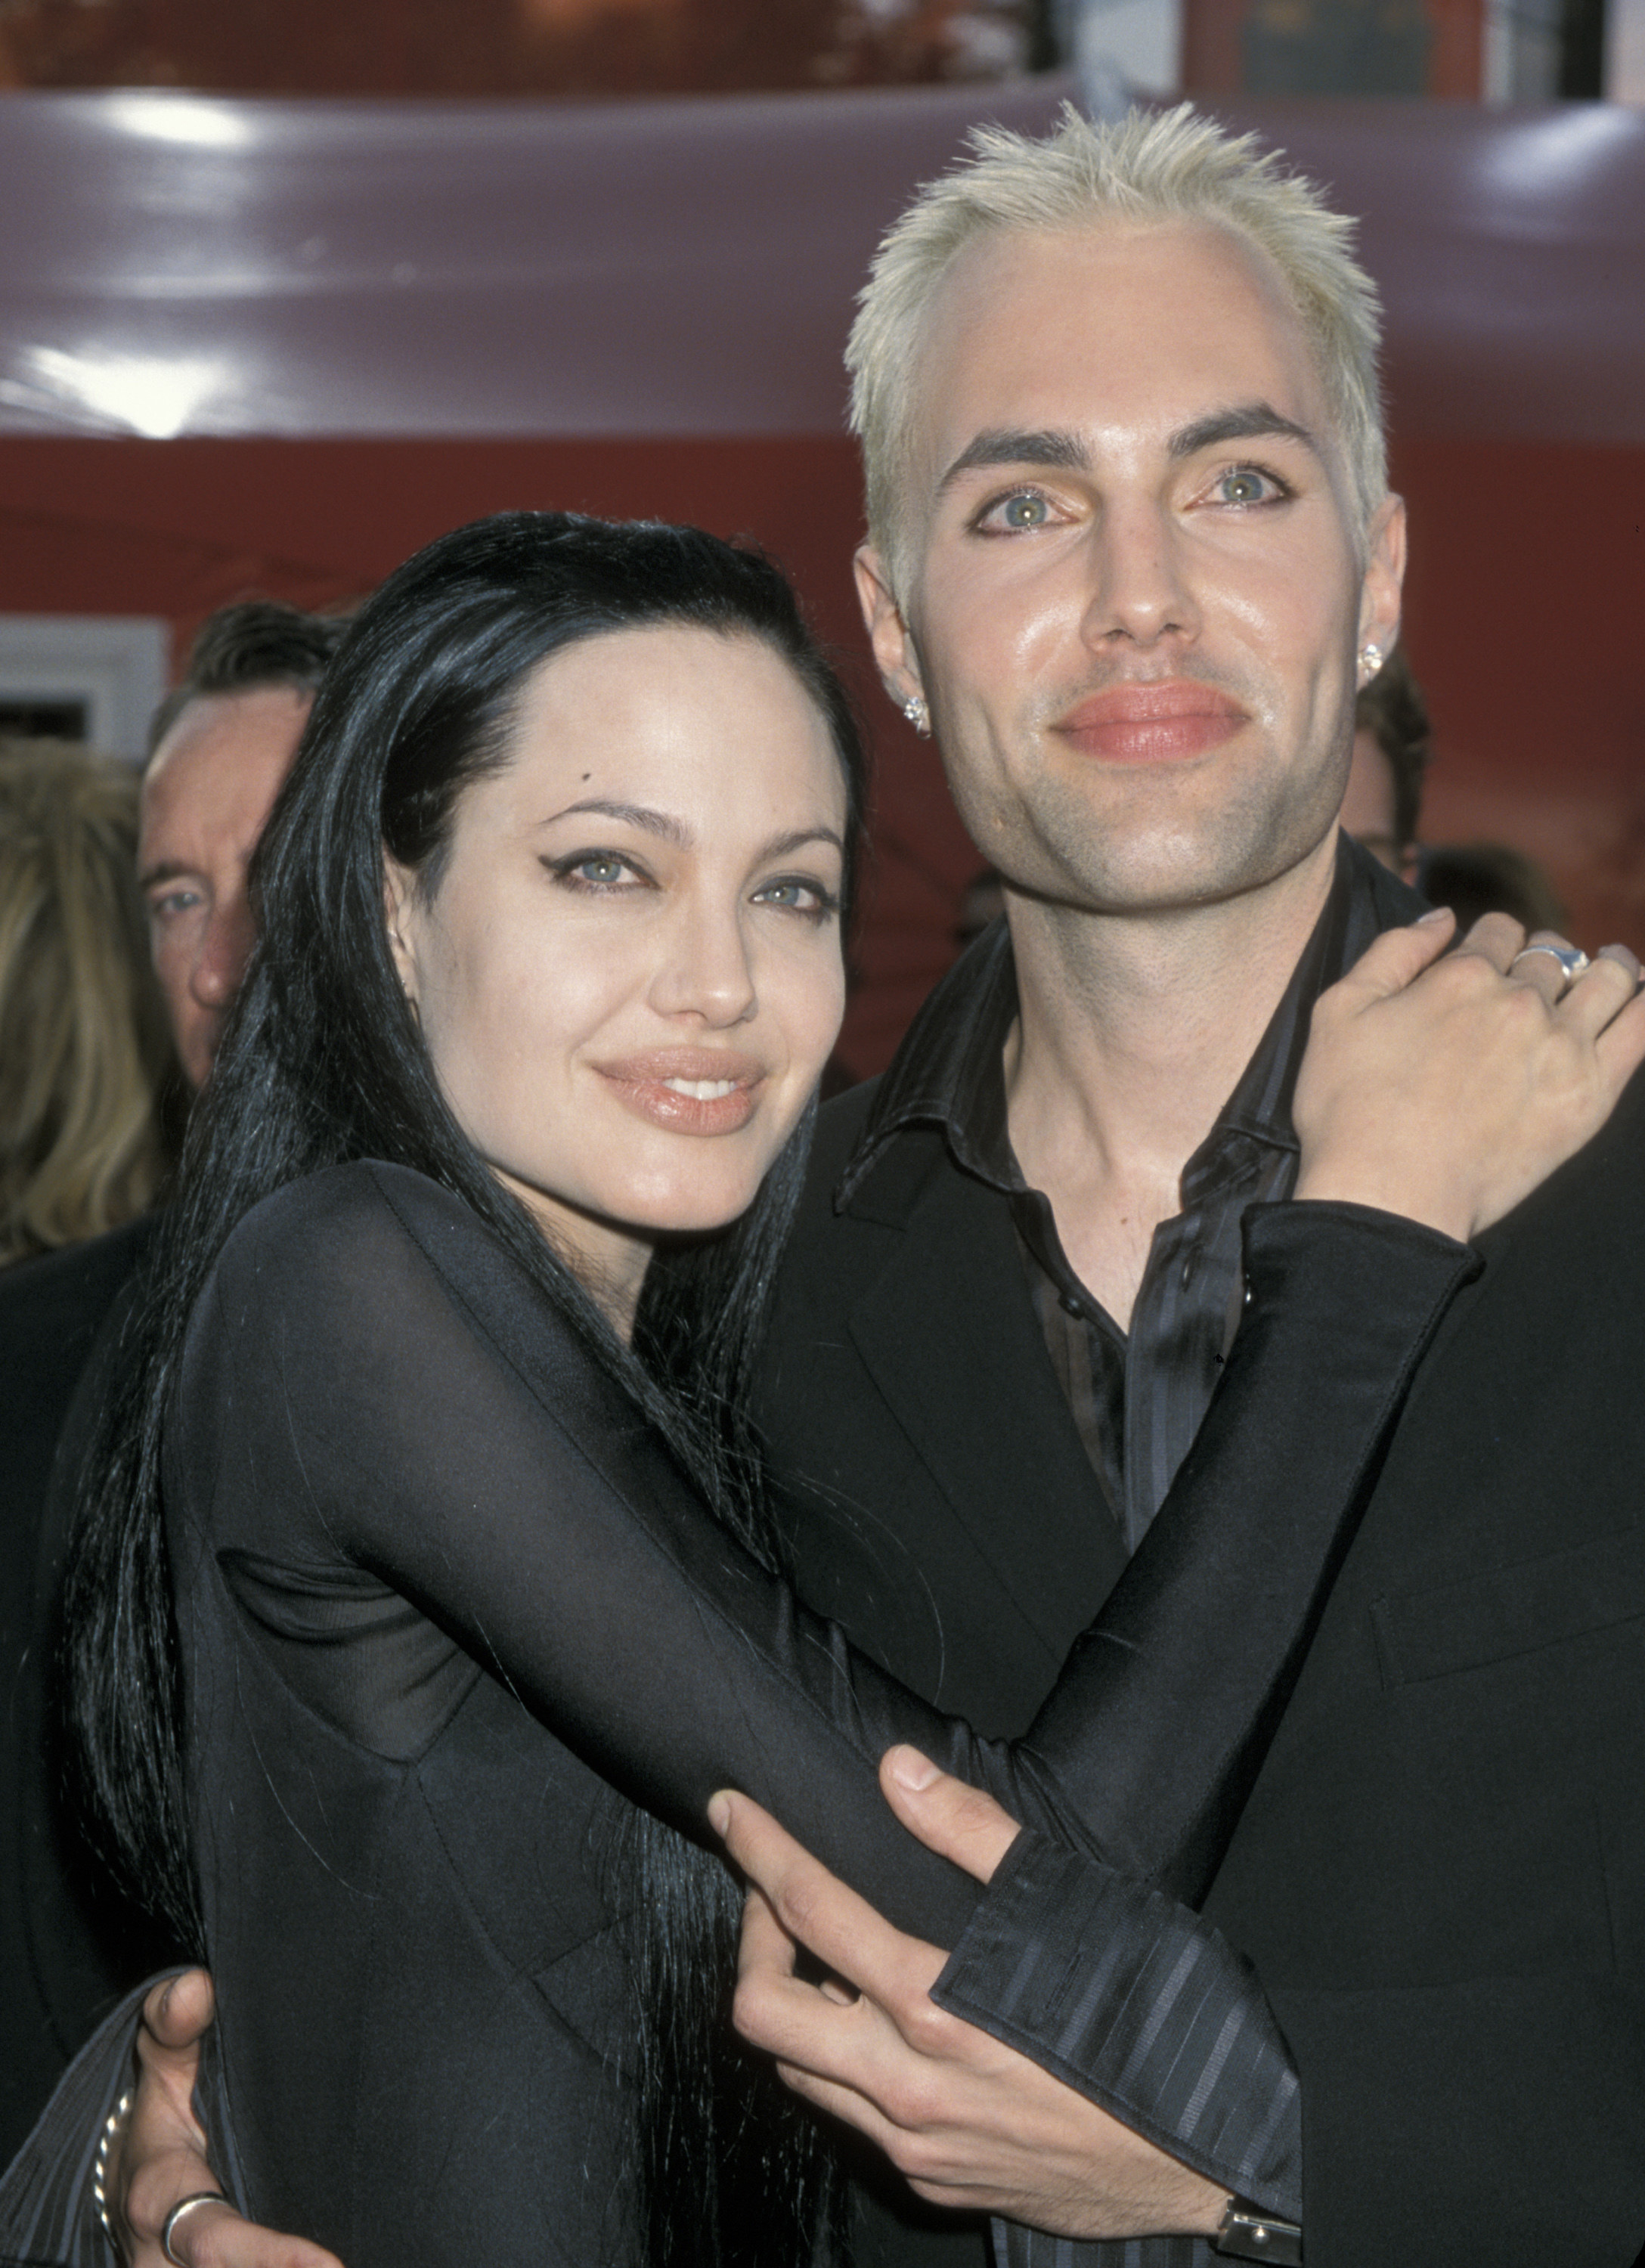 Angelina Jolie and James Haven wear all black and stand posing for a photo with their arms around each other